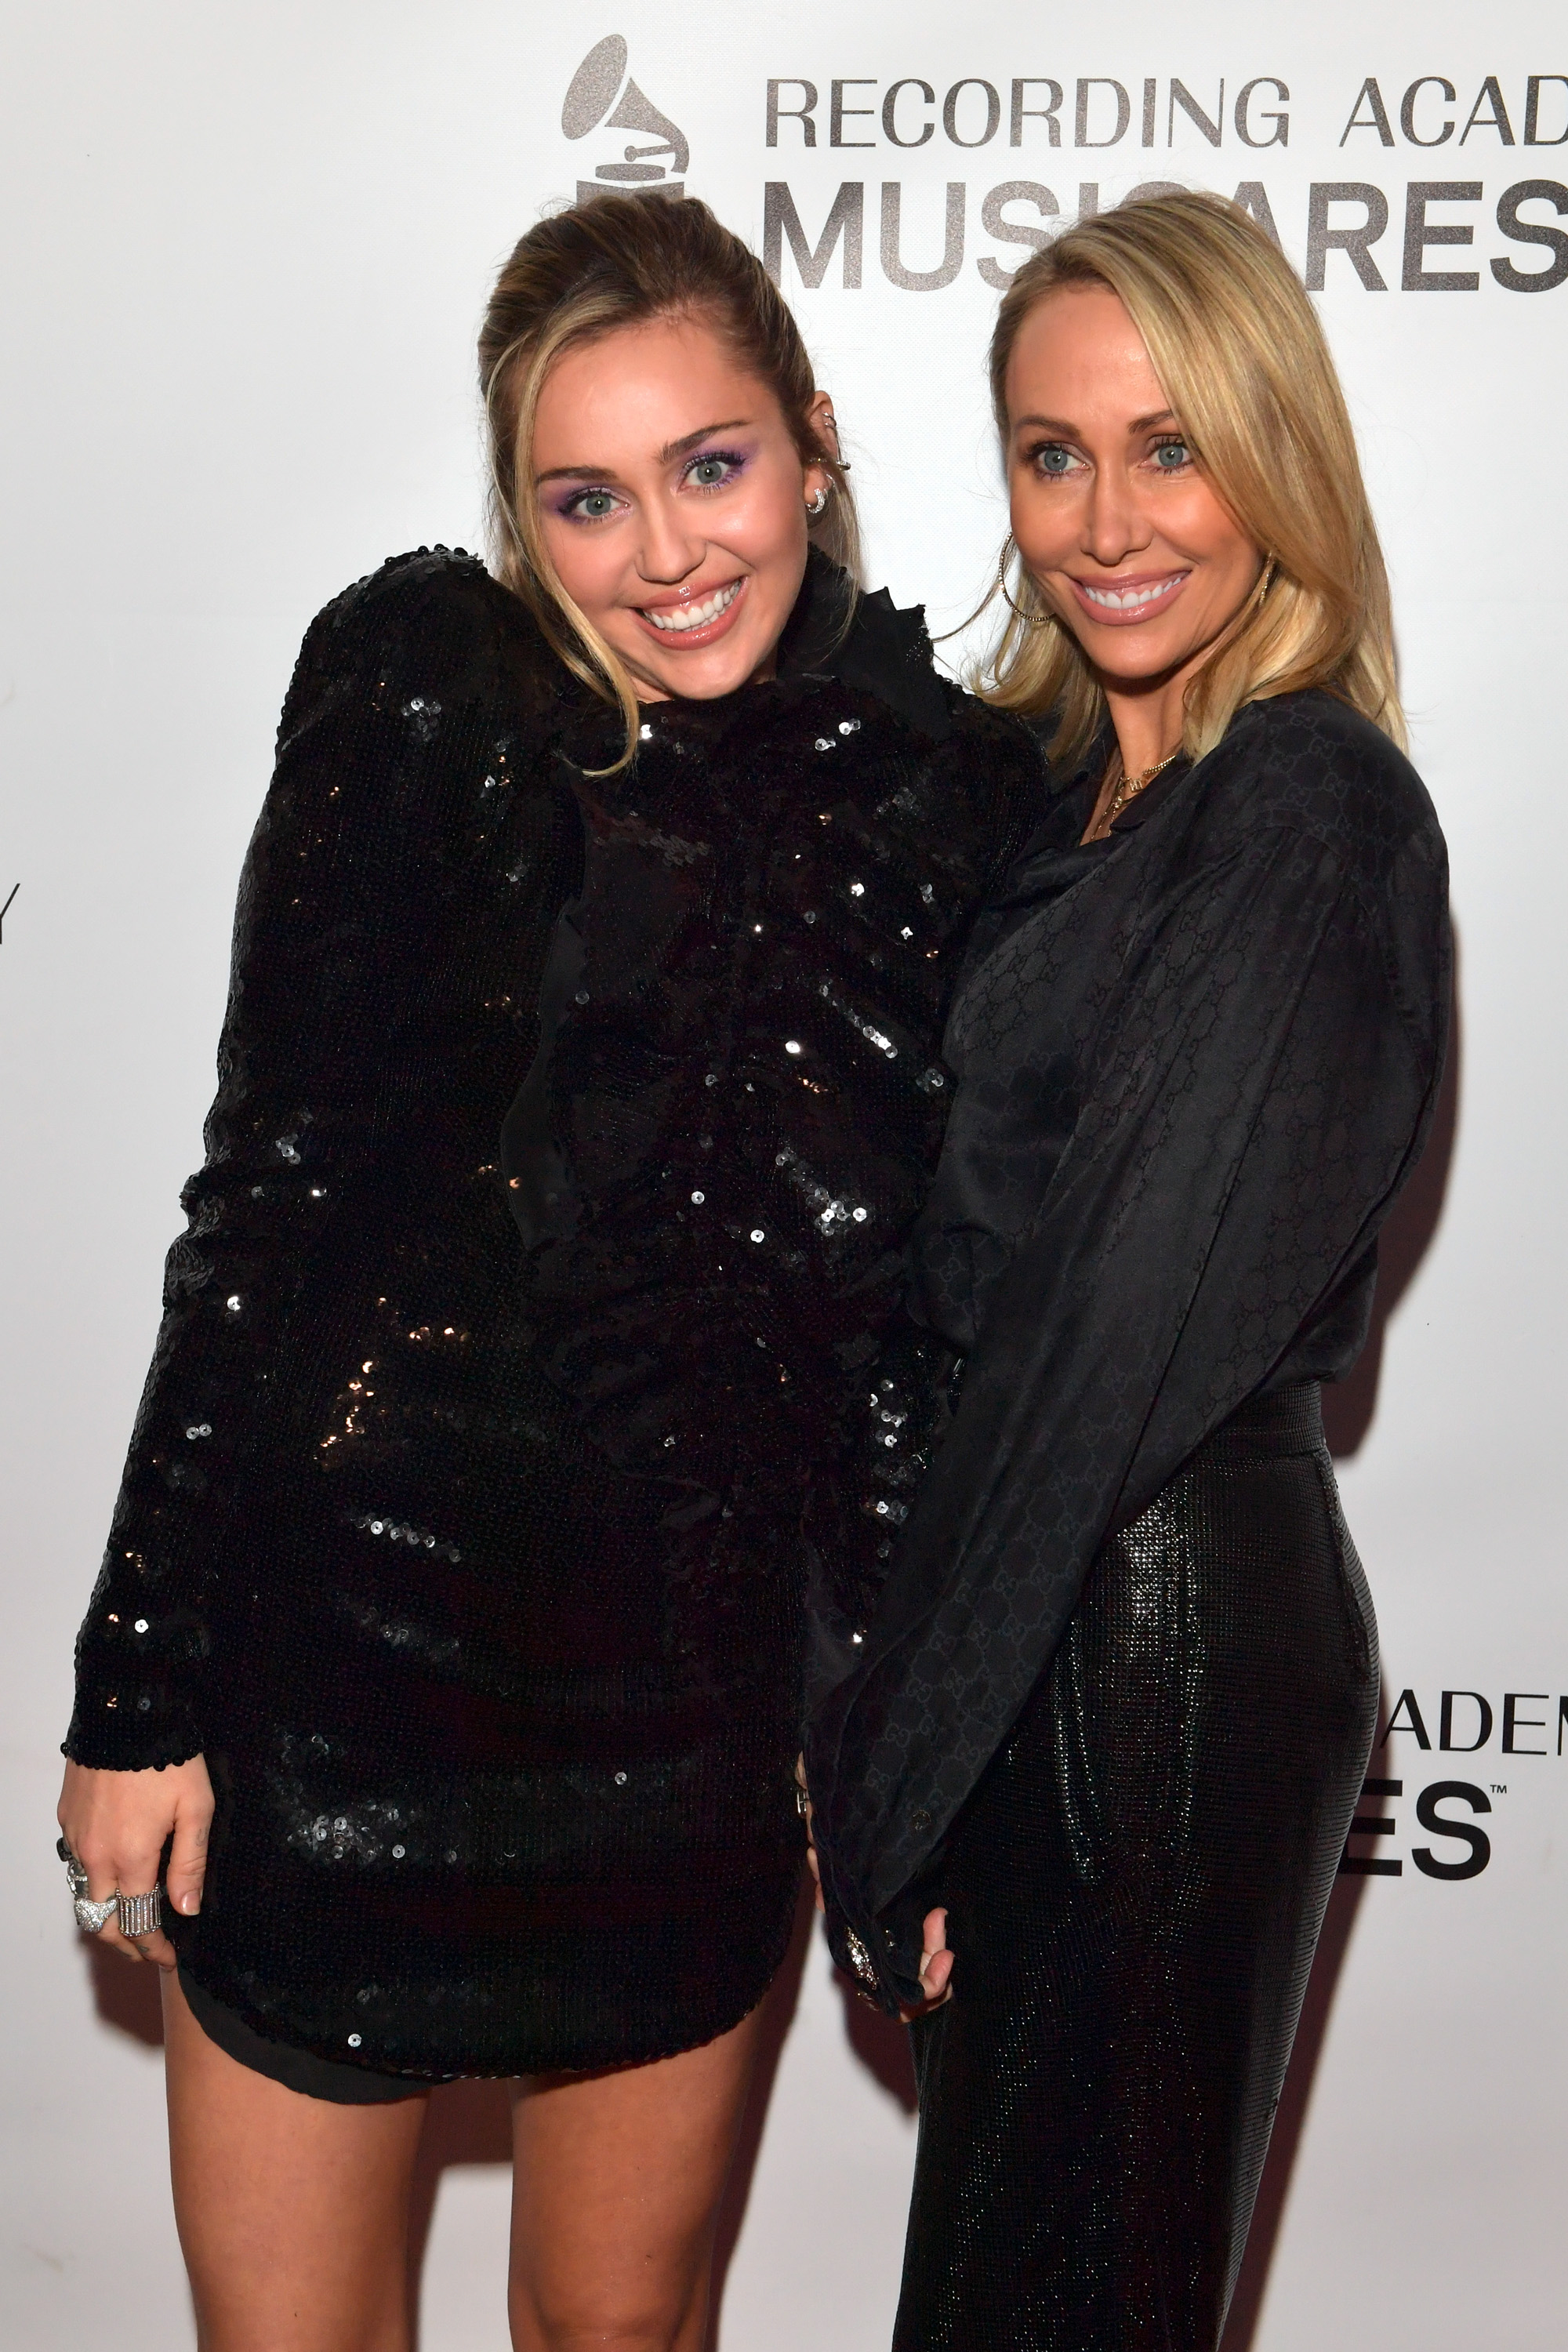 Miley Cyrus and Tish Cyrus attend MusiCares Person of the Year honoring Dolly Parton in Los Angeles, California, on February 8, 2019. | Source: Getty Images